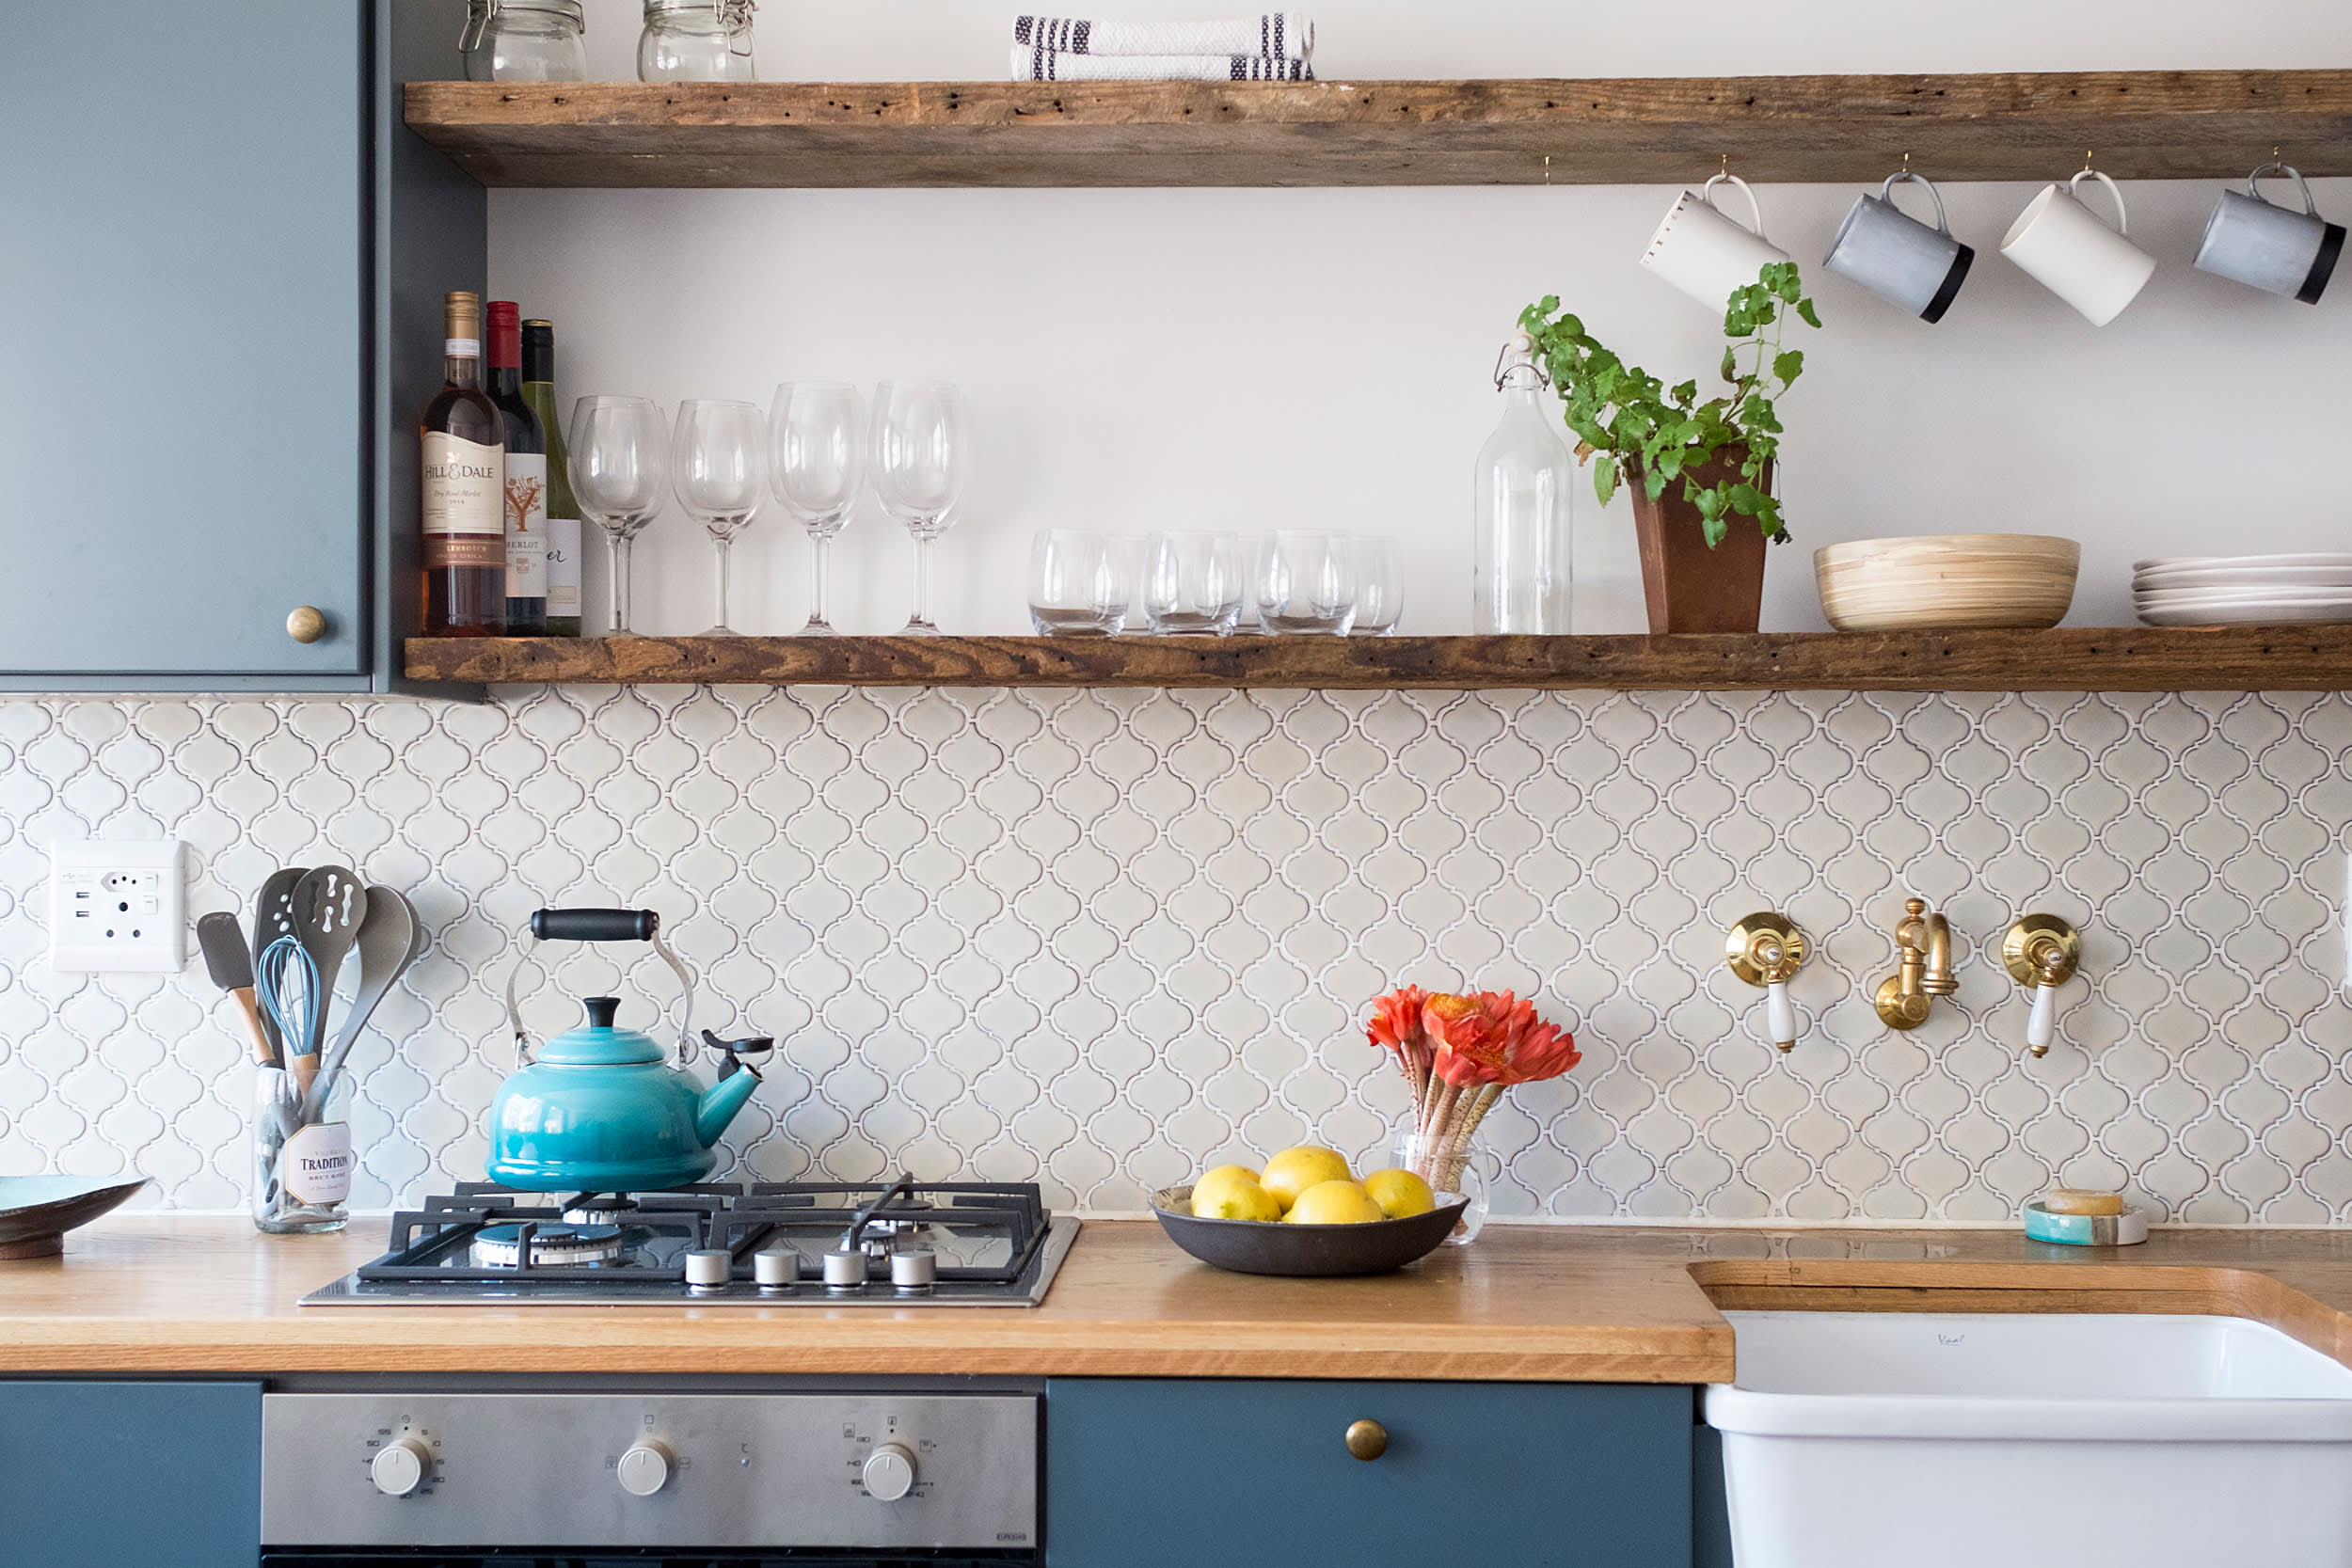 11 Ways You Can Make Open Shelving Work in Your Pantry